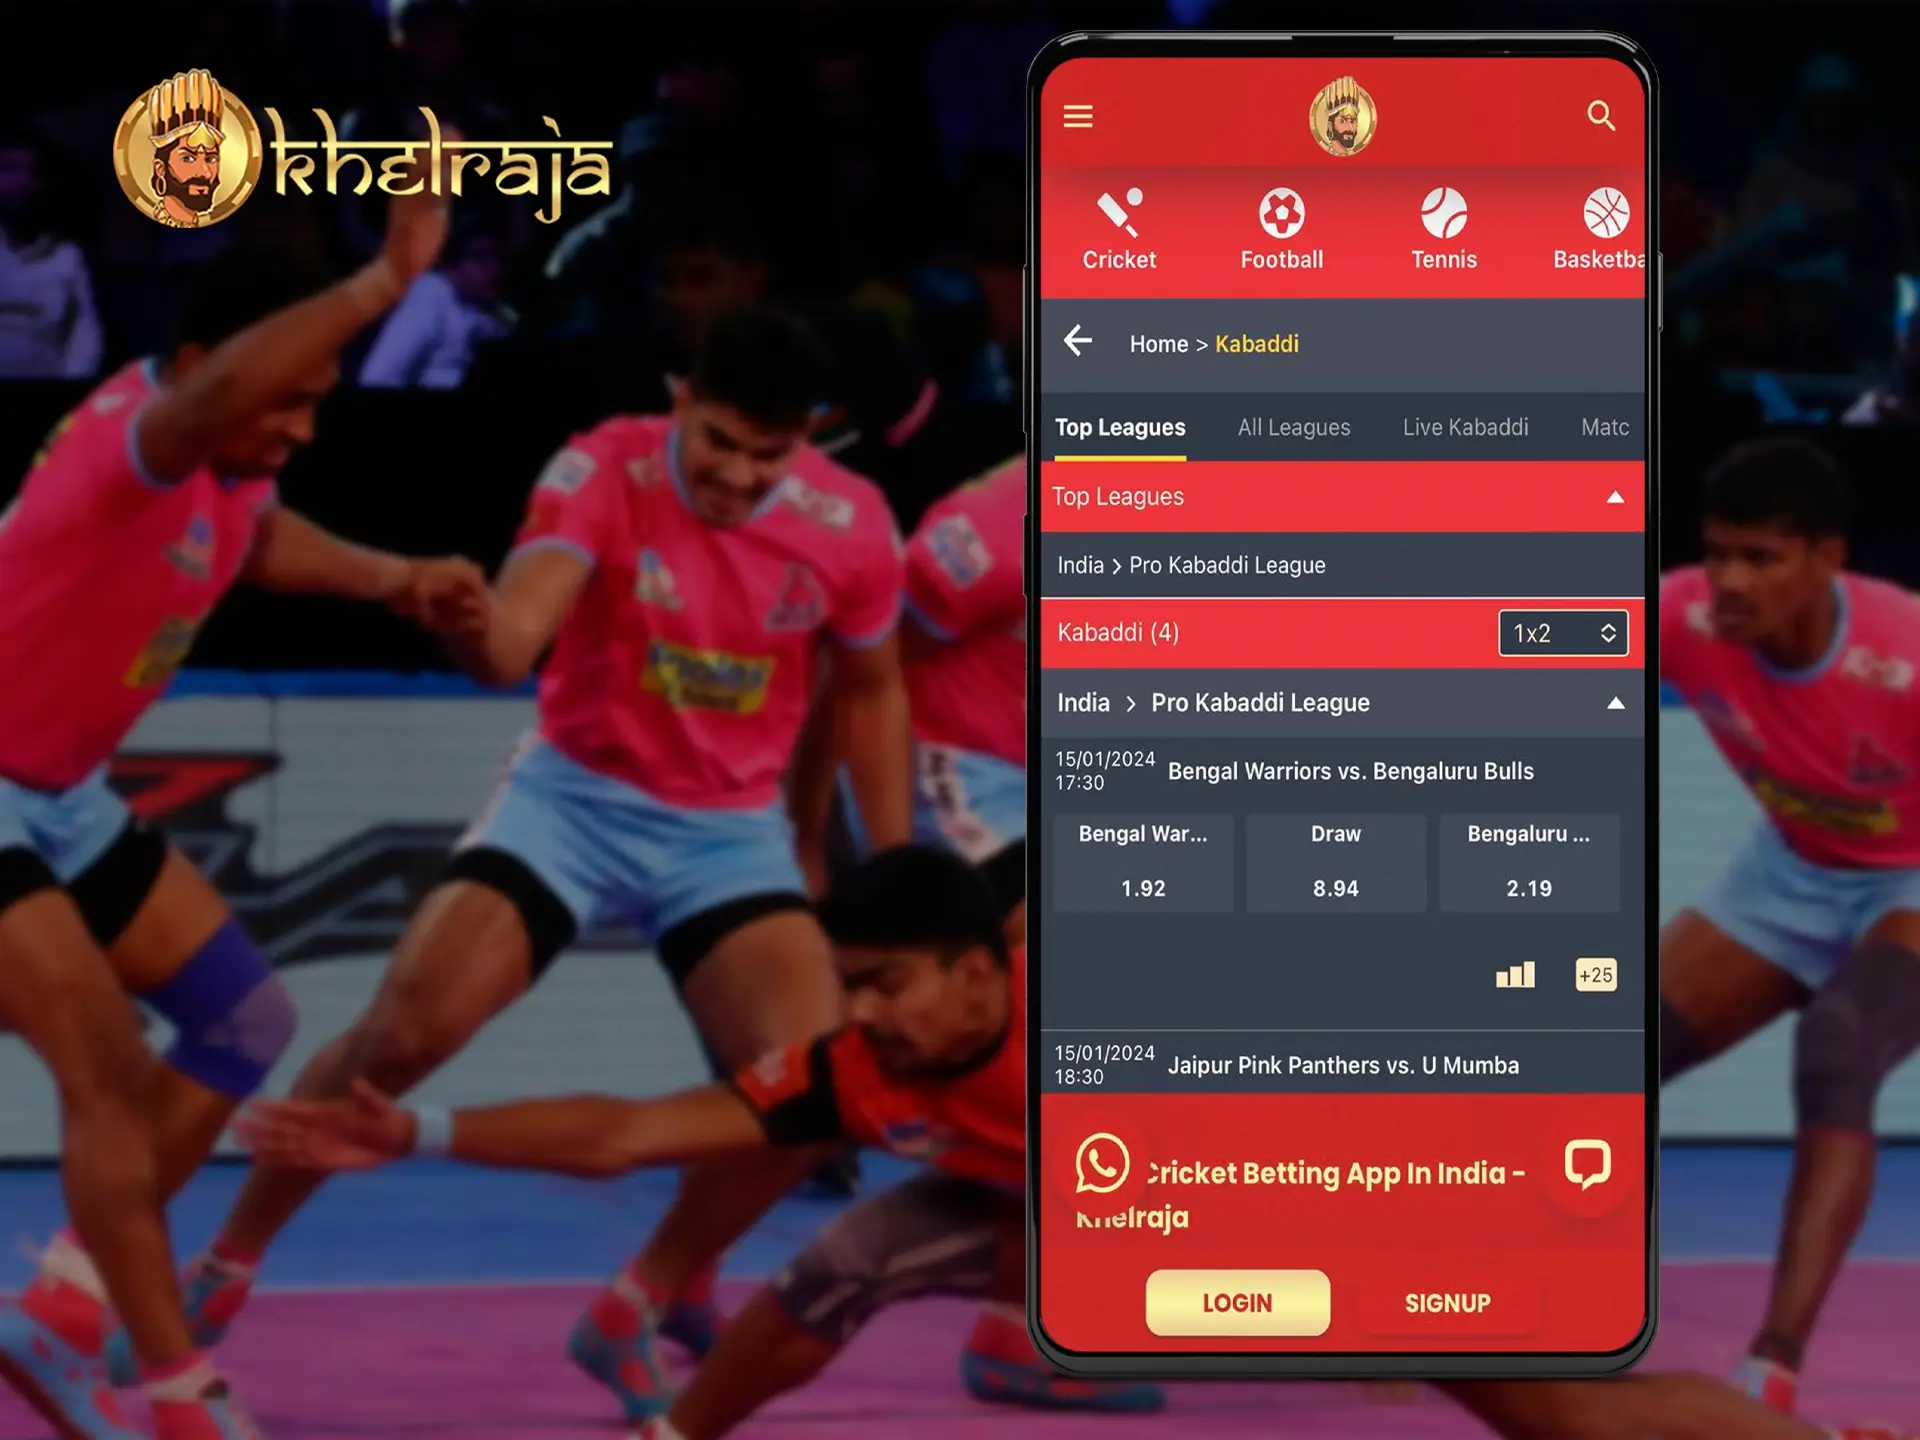 The excellent design of the Khelraja app itself tells you where the tab with Kabaddi is.